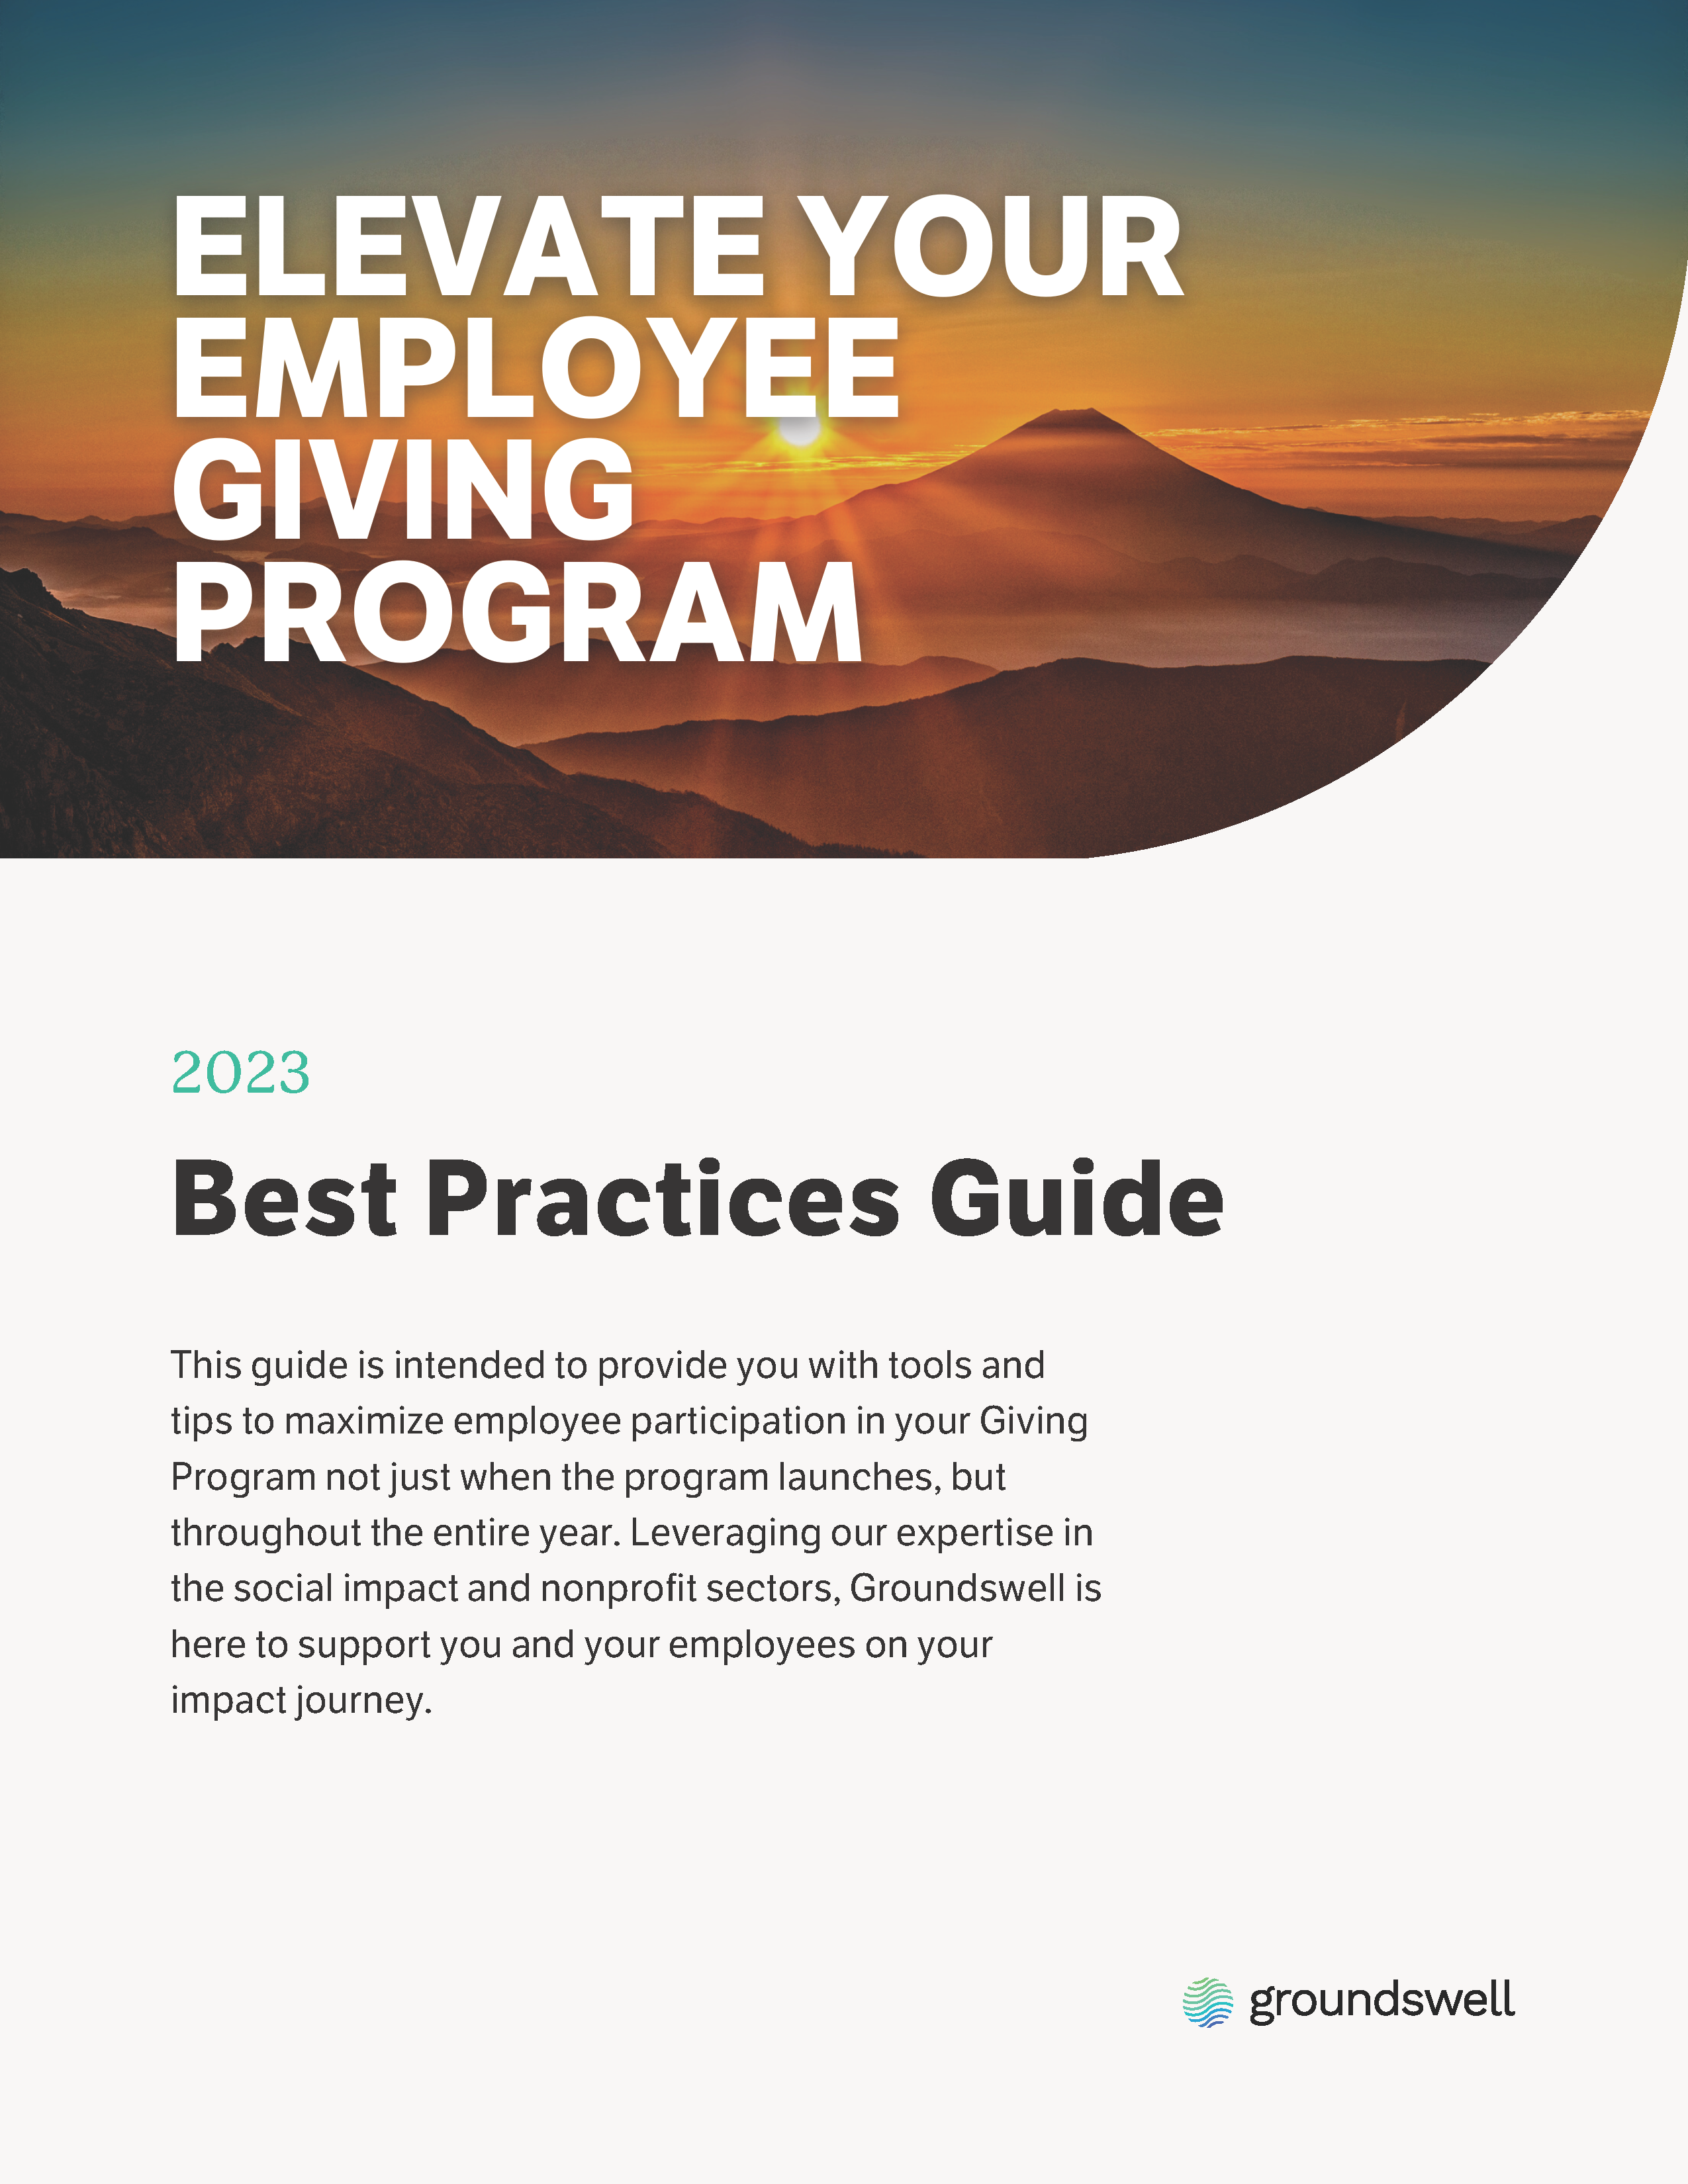 Employee Giving Program - Best Practices Guide_2023_Page_1.png